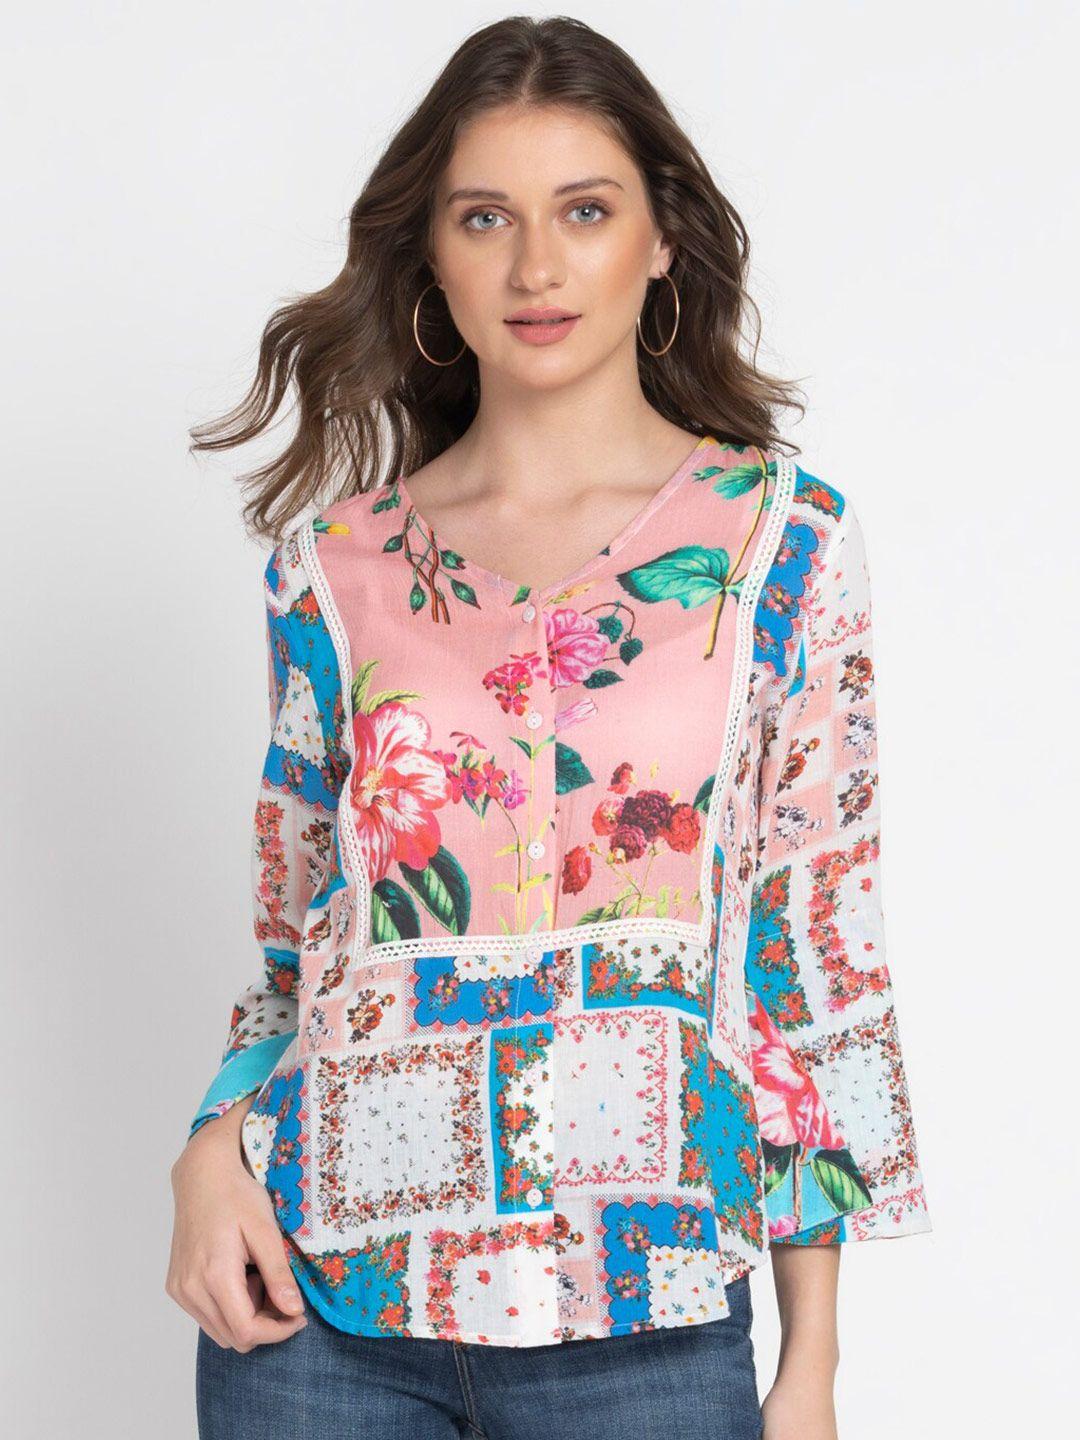 shaye floral print v-neck bell sleeve pure cotton shirt style top